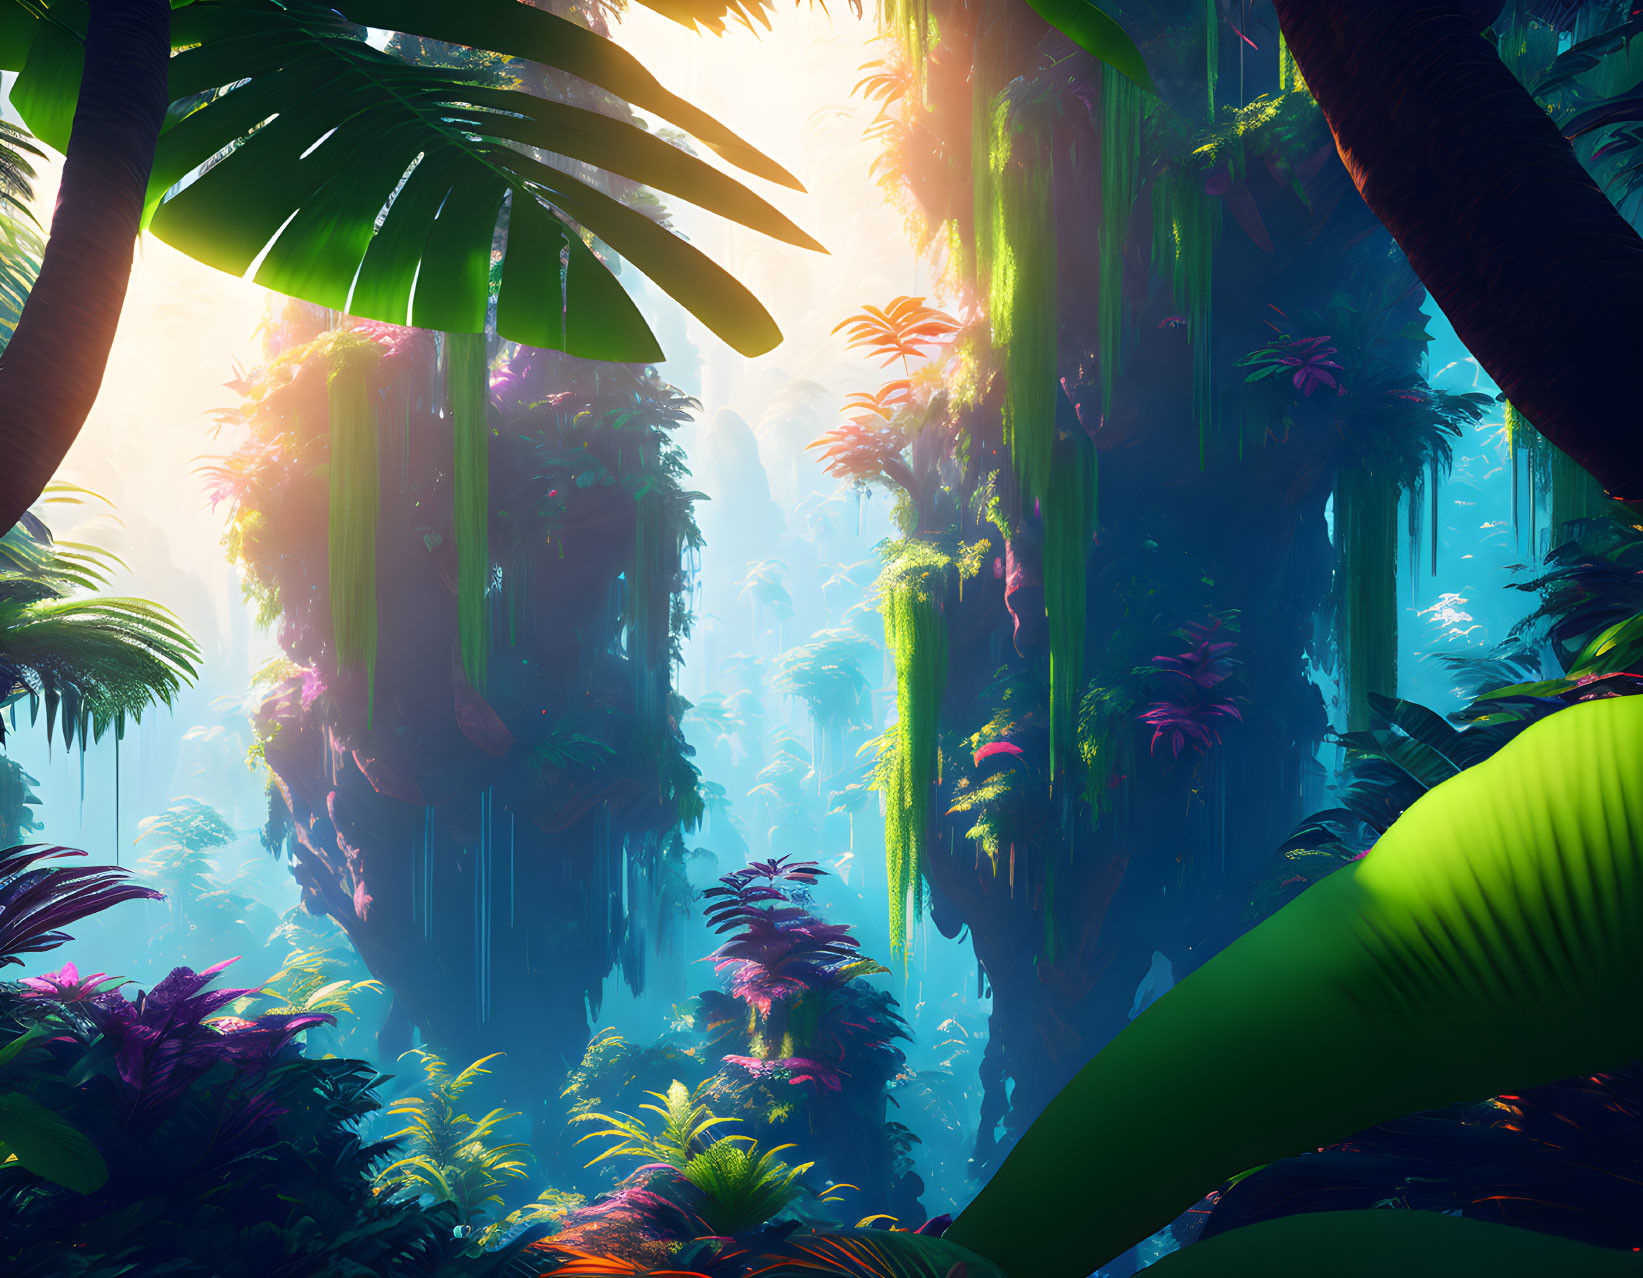 Vibrant jungle scene with towering trees and sunlight filtering through canopy